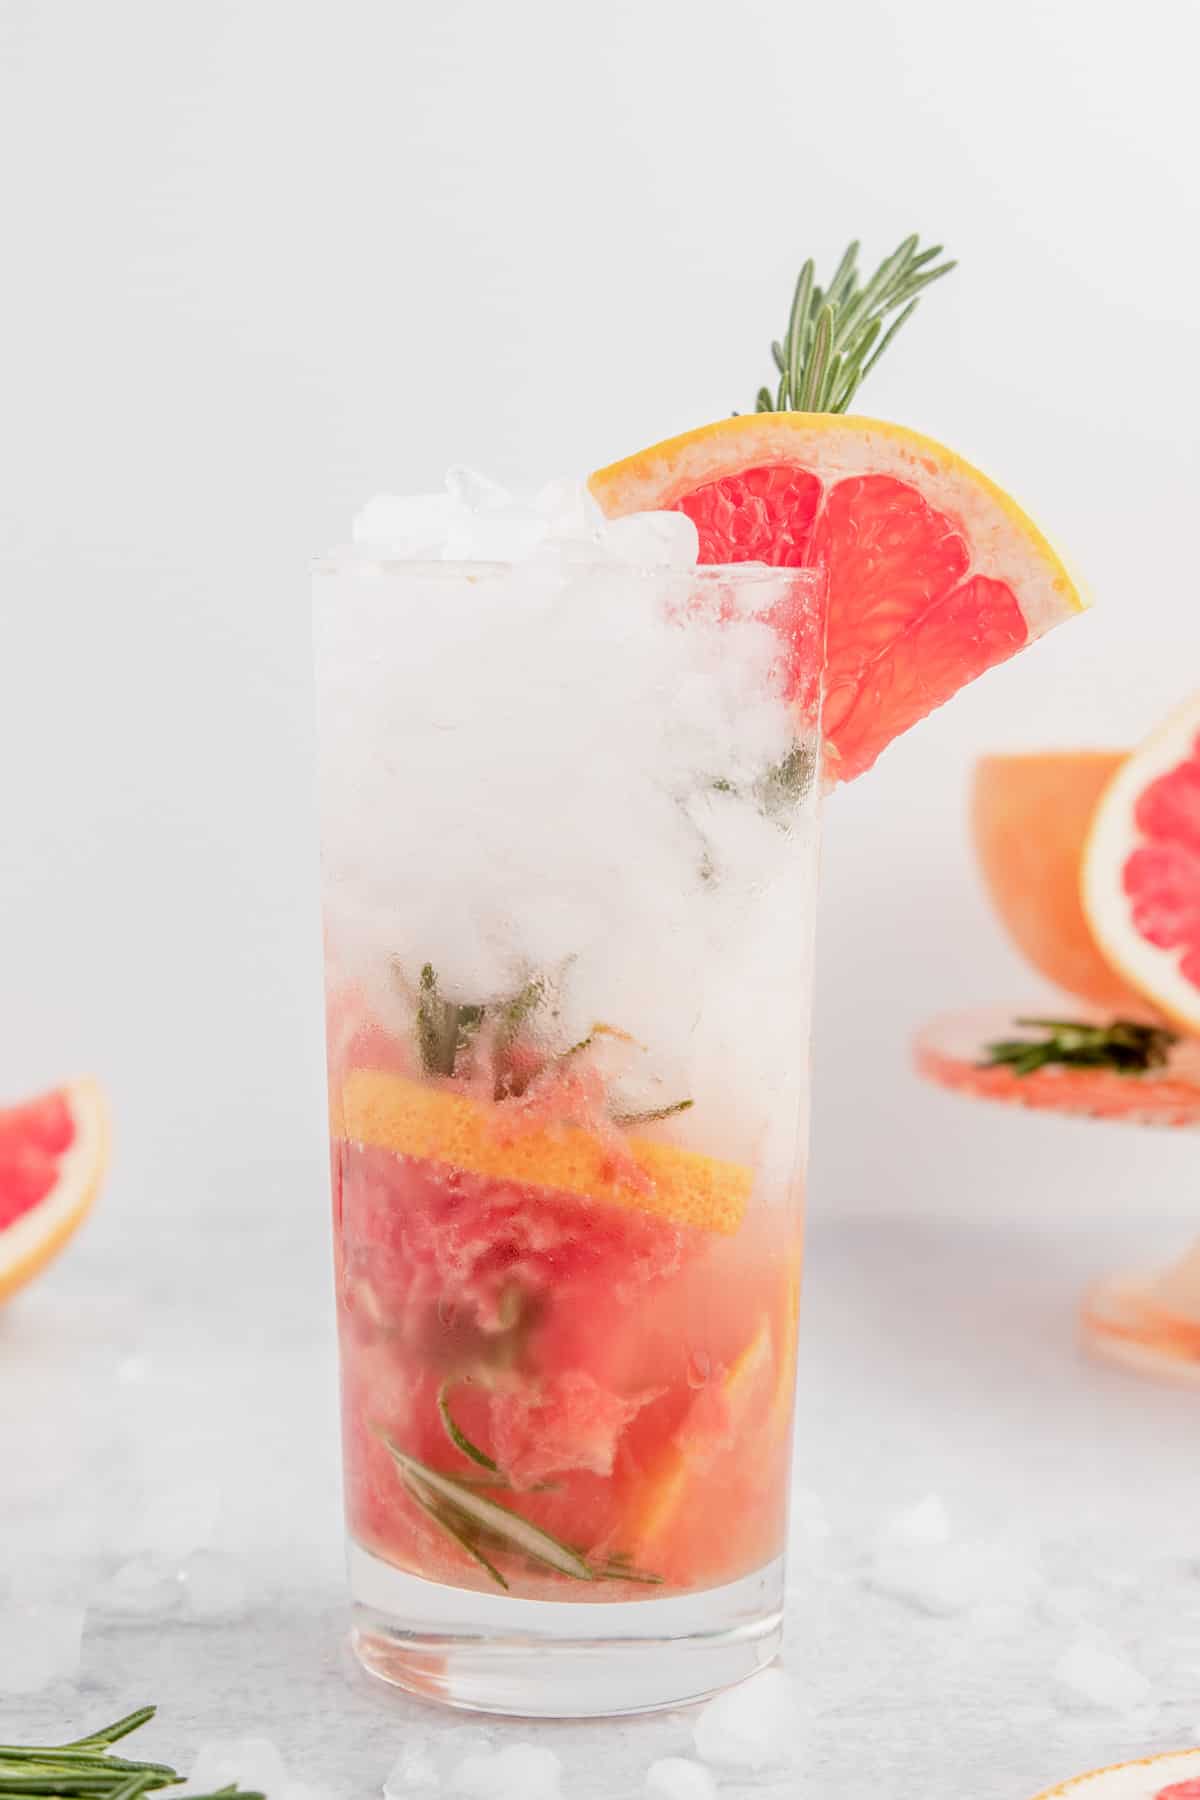 Grapefruit mojito with rosemary in a tall glass garnished with a fresh sprig of rosemary and a grapefruit wedge.